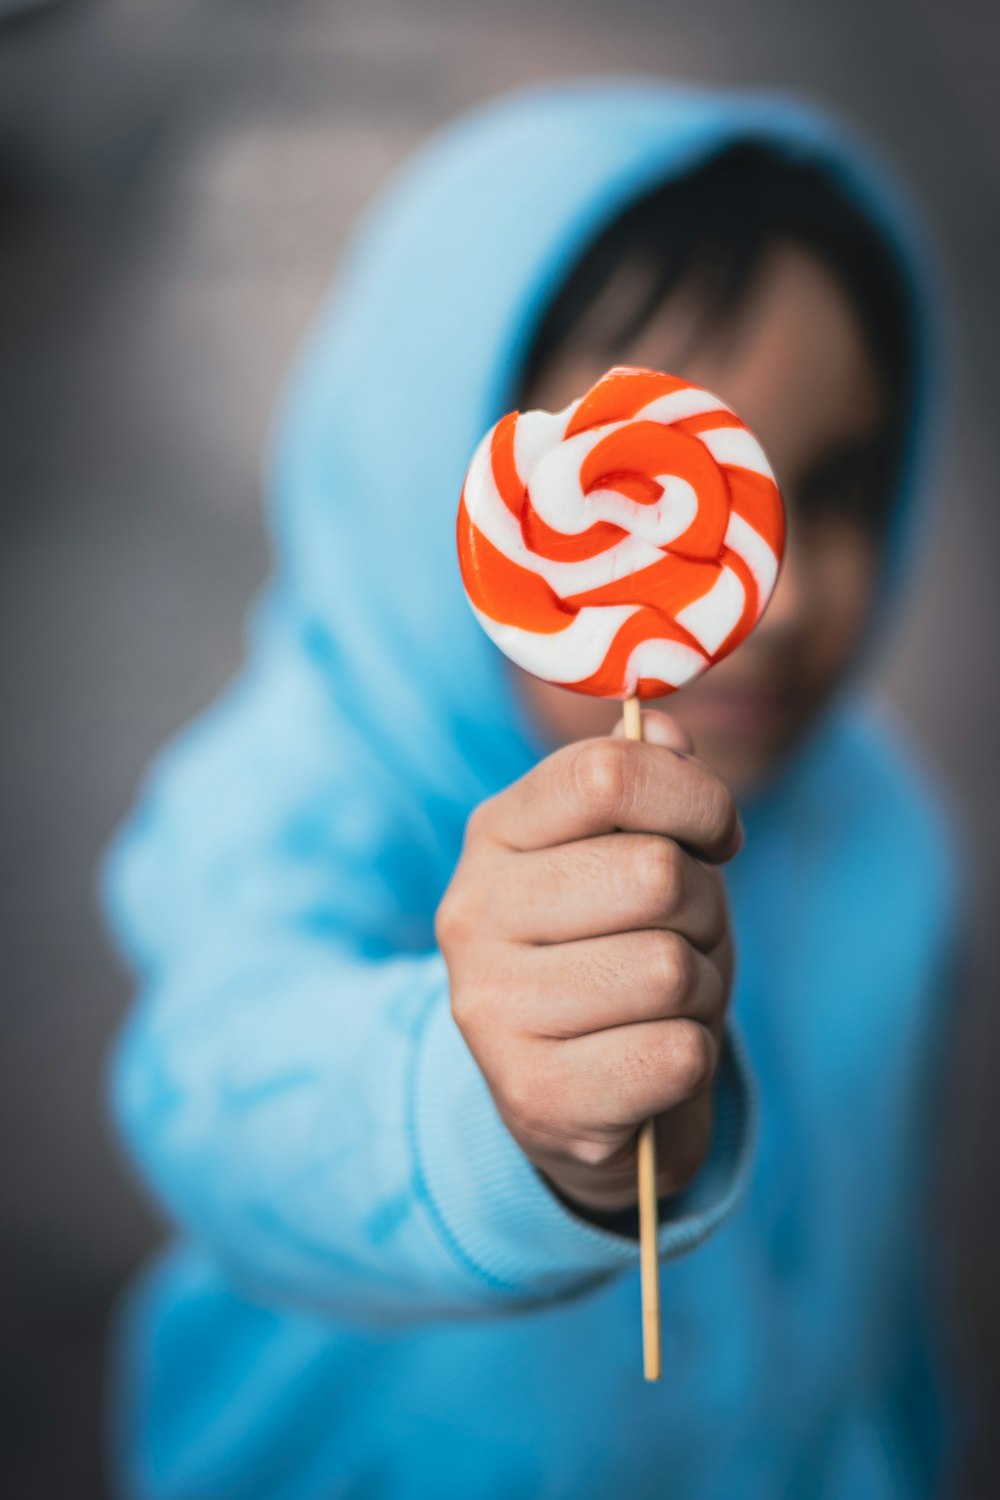 a person holding a lollipop in their hand